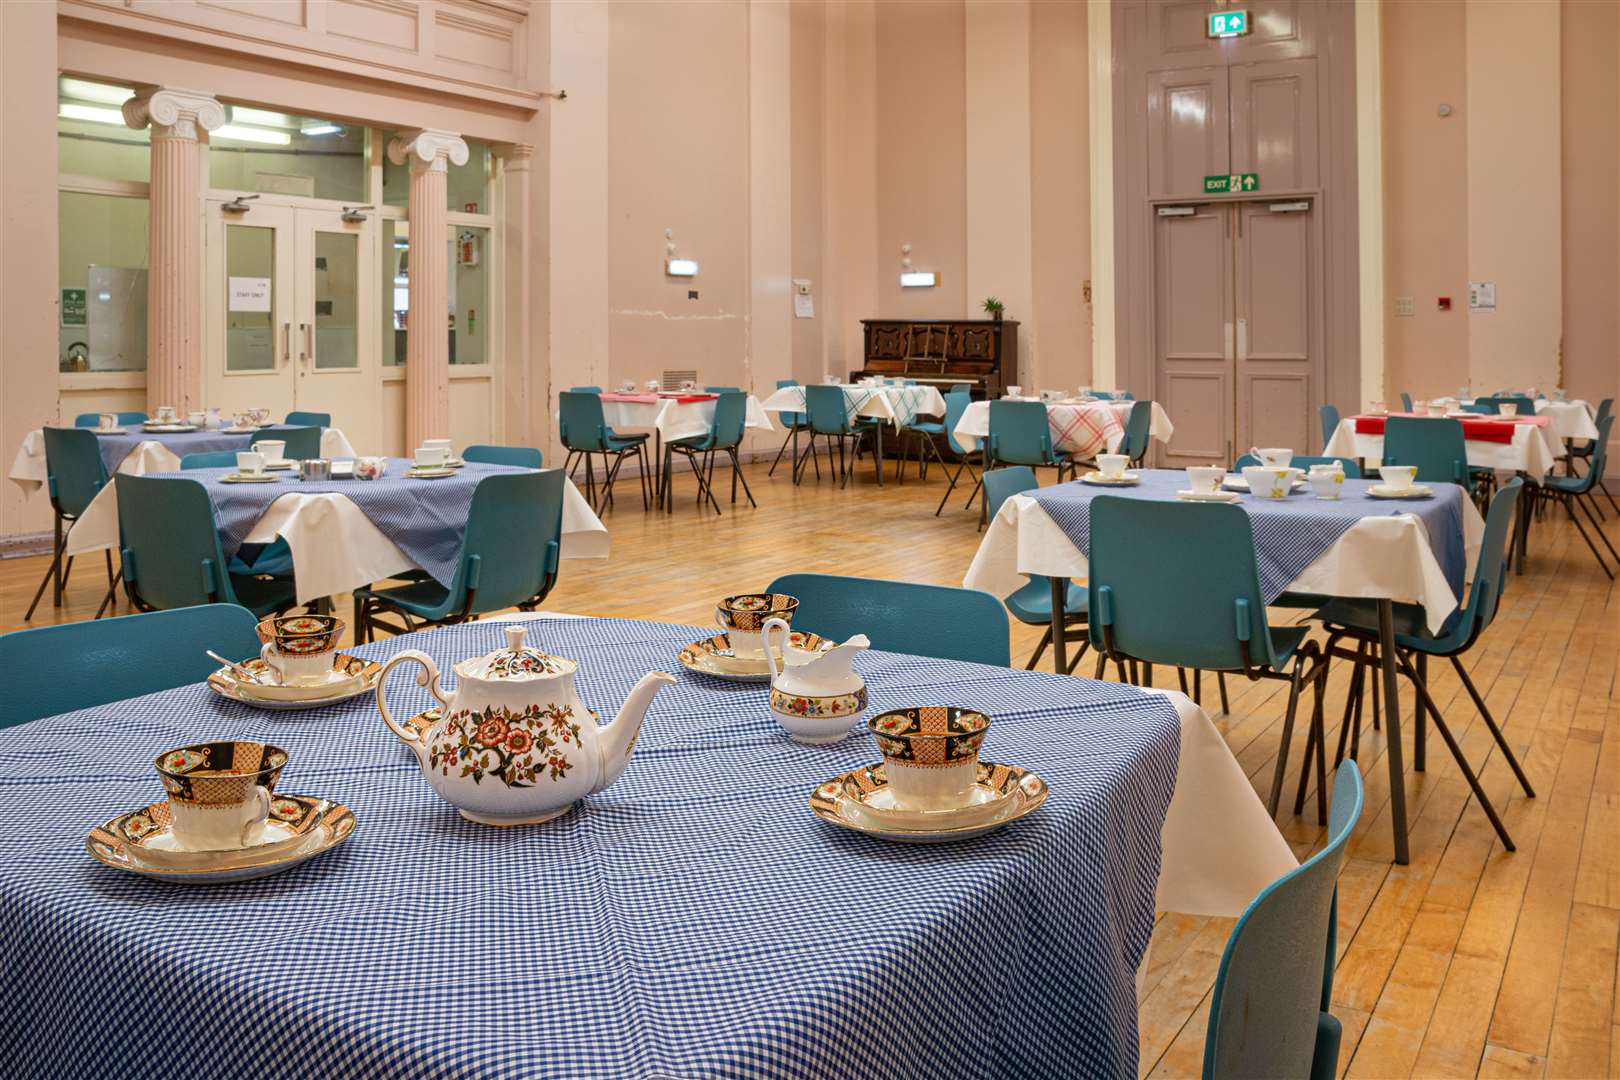 The lesser hall regularly hosts teas and coffee mornings.